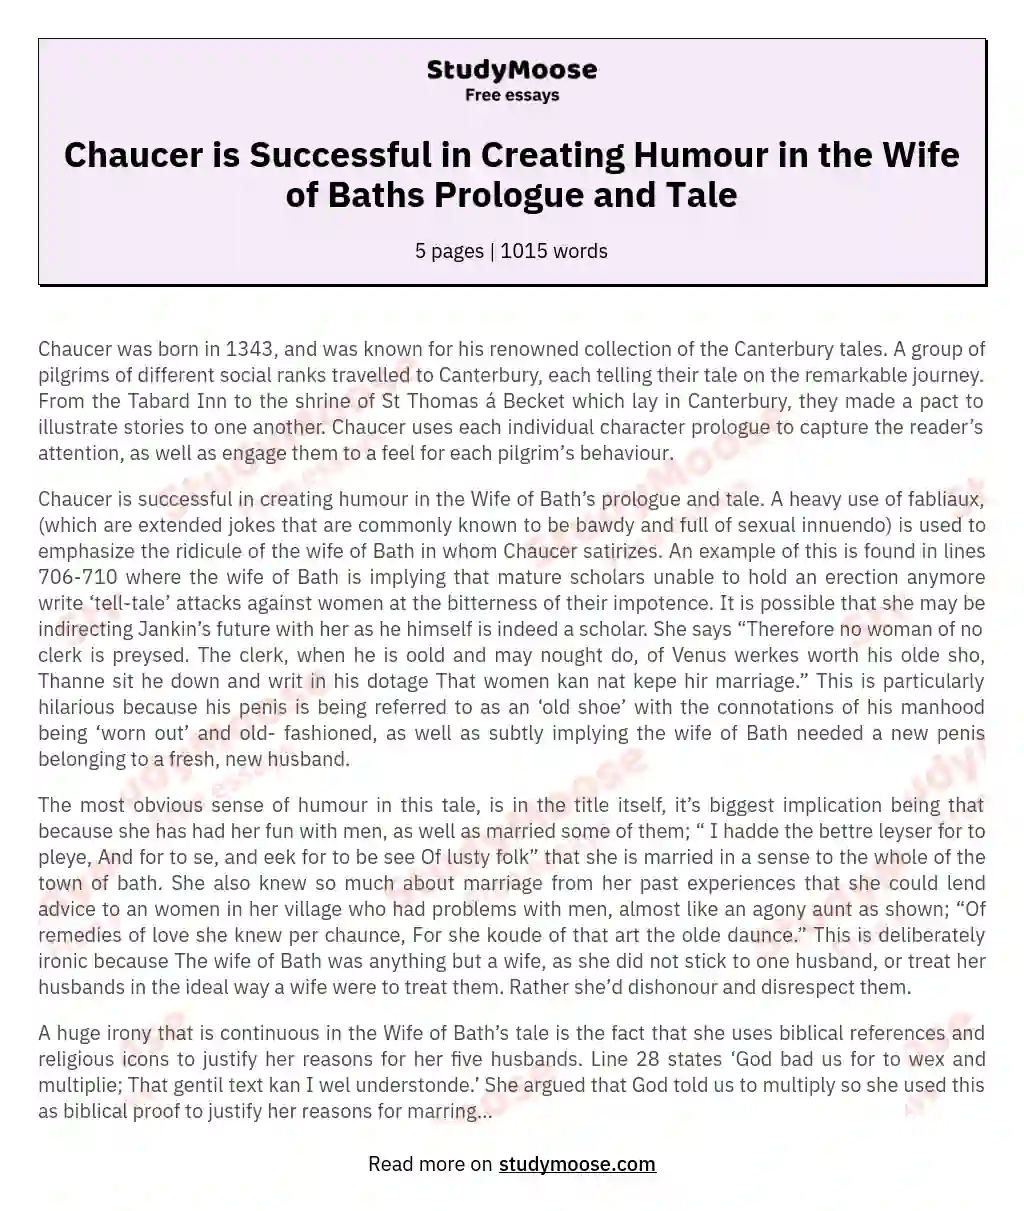 Chaucer is Successful in Creating Humour in the Wife of Baths Prologue and Tale